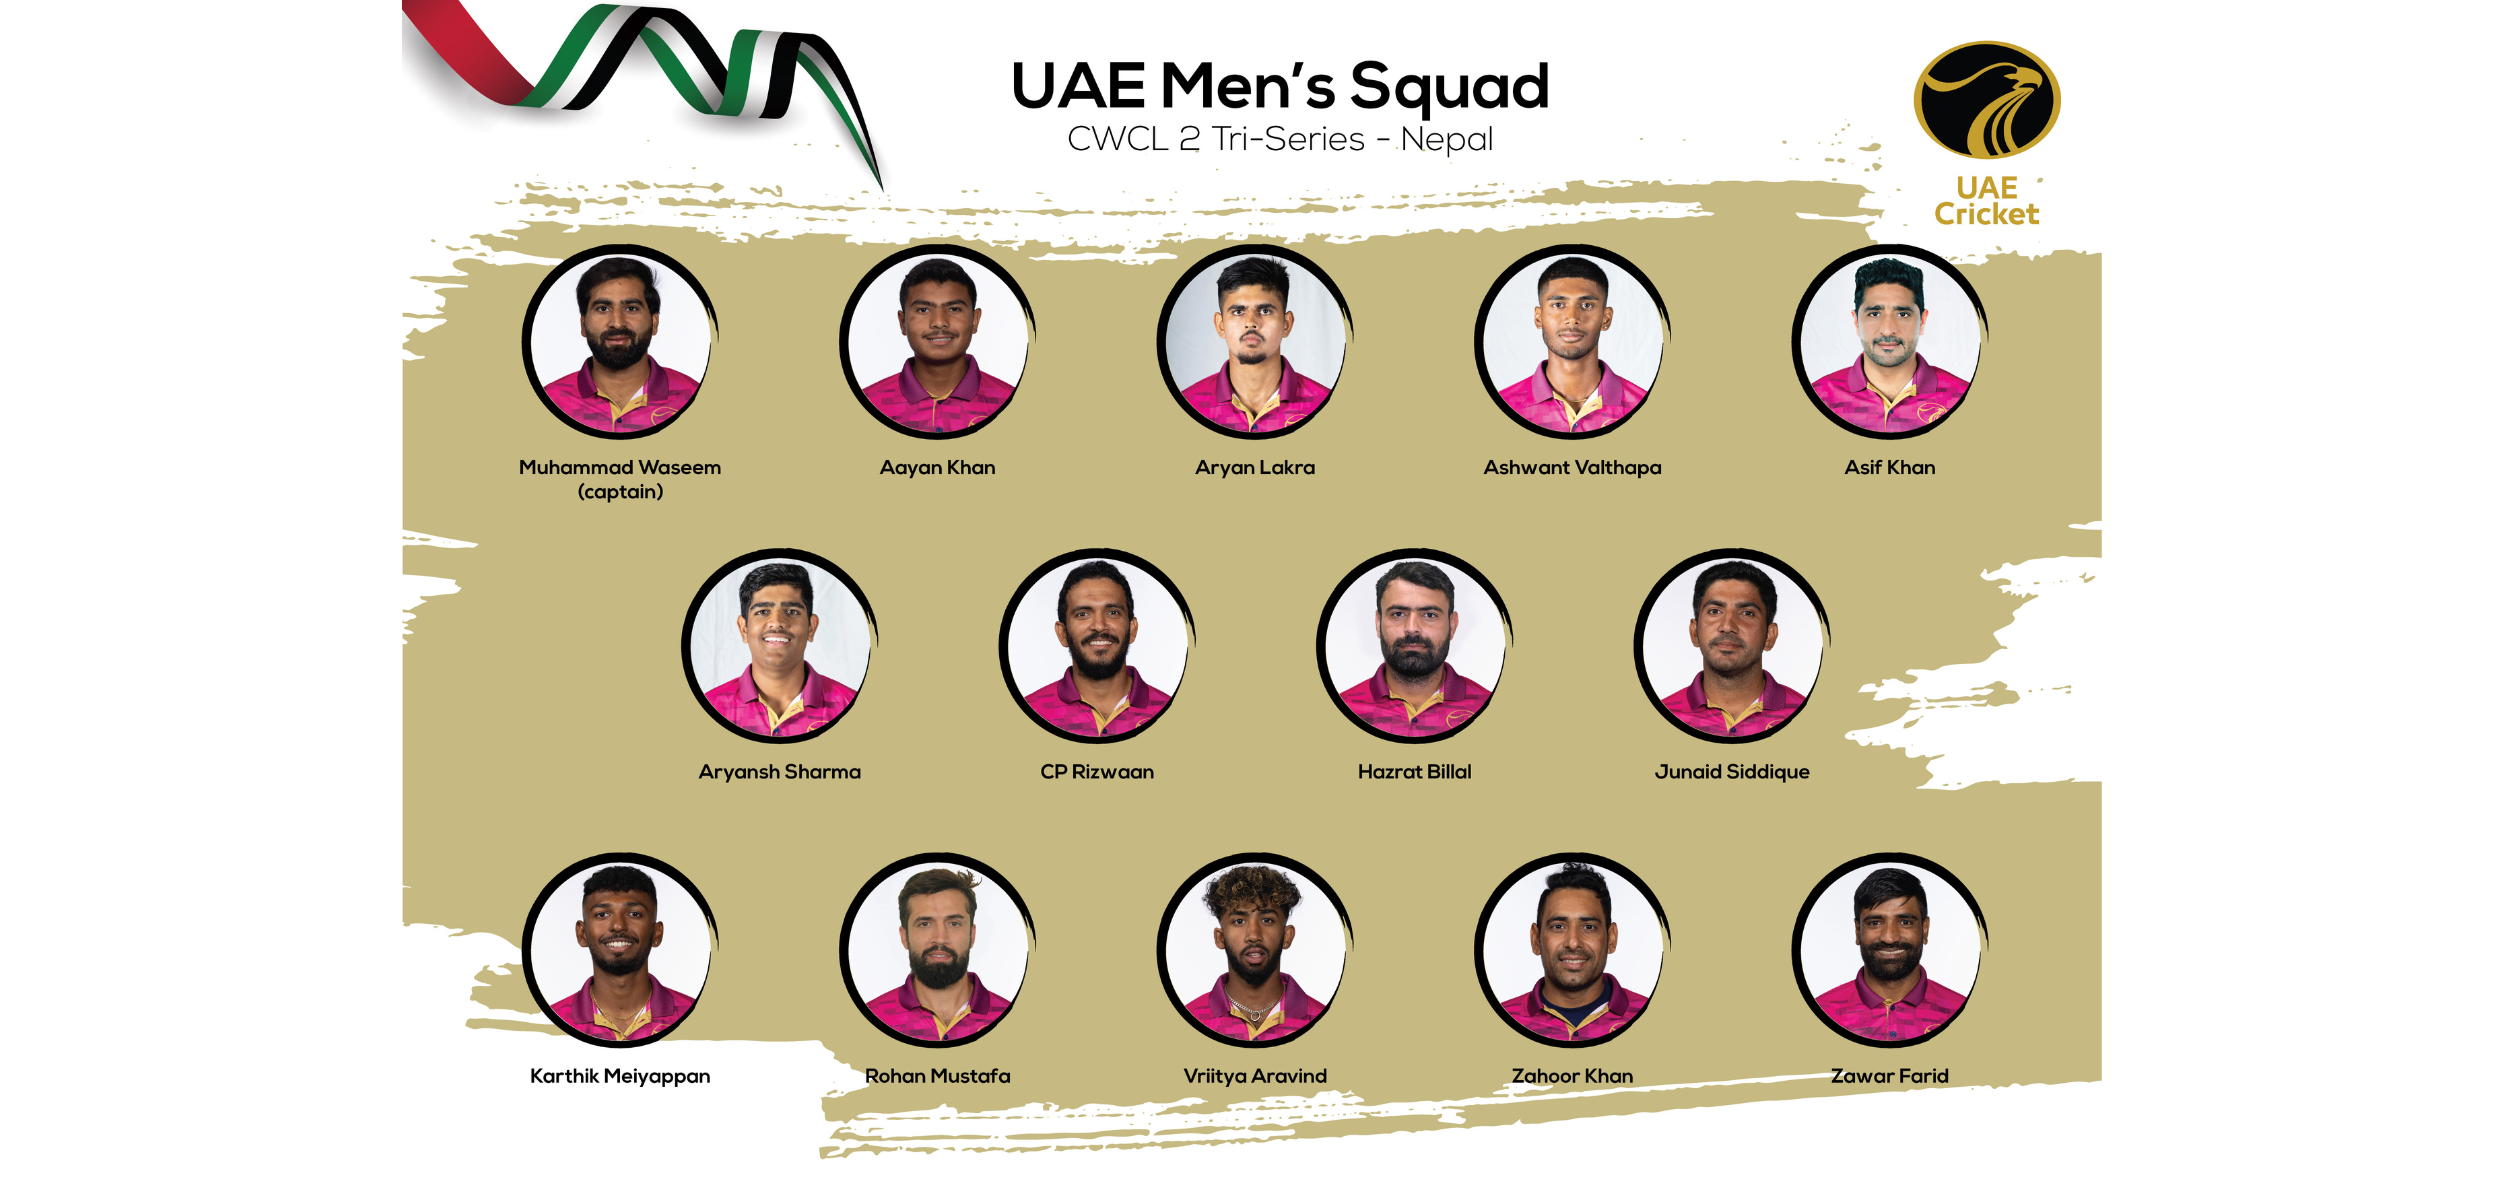 ECB: UAE squad to travel today to compete in ICC Cricket World Cup League 2 Tri-series in Nepal